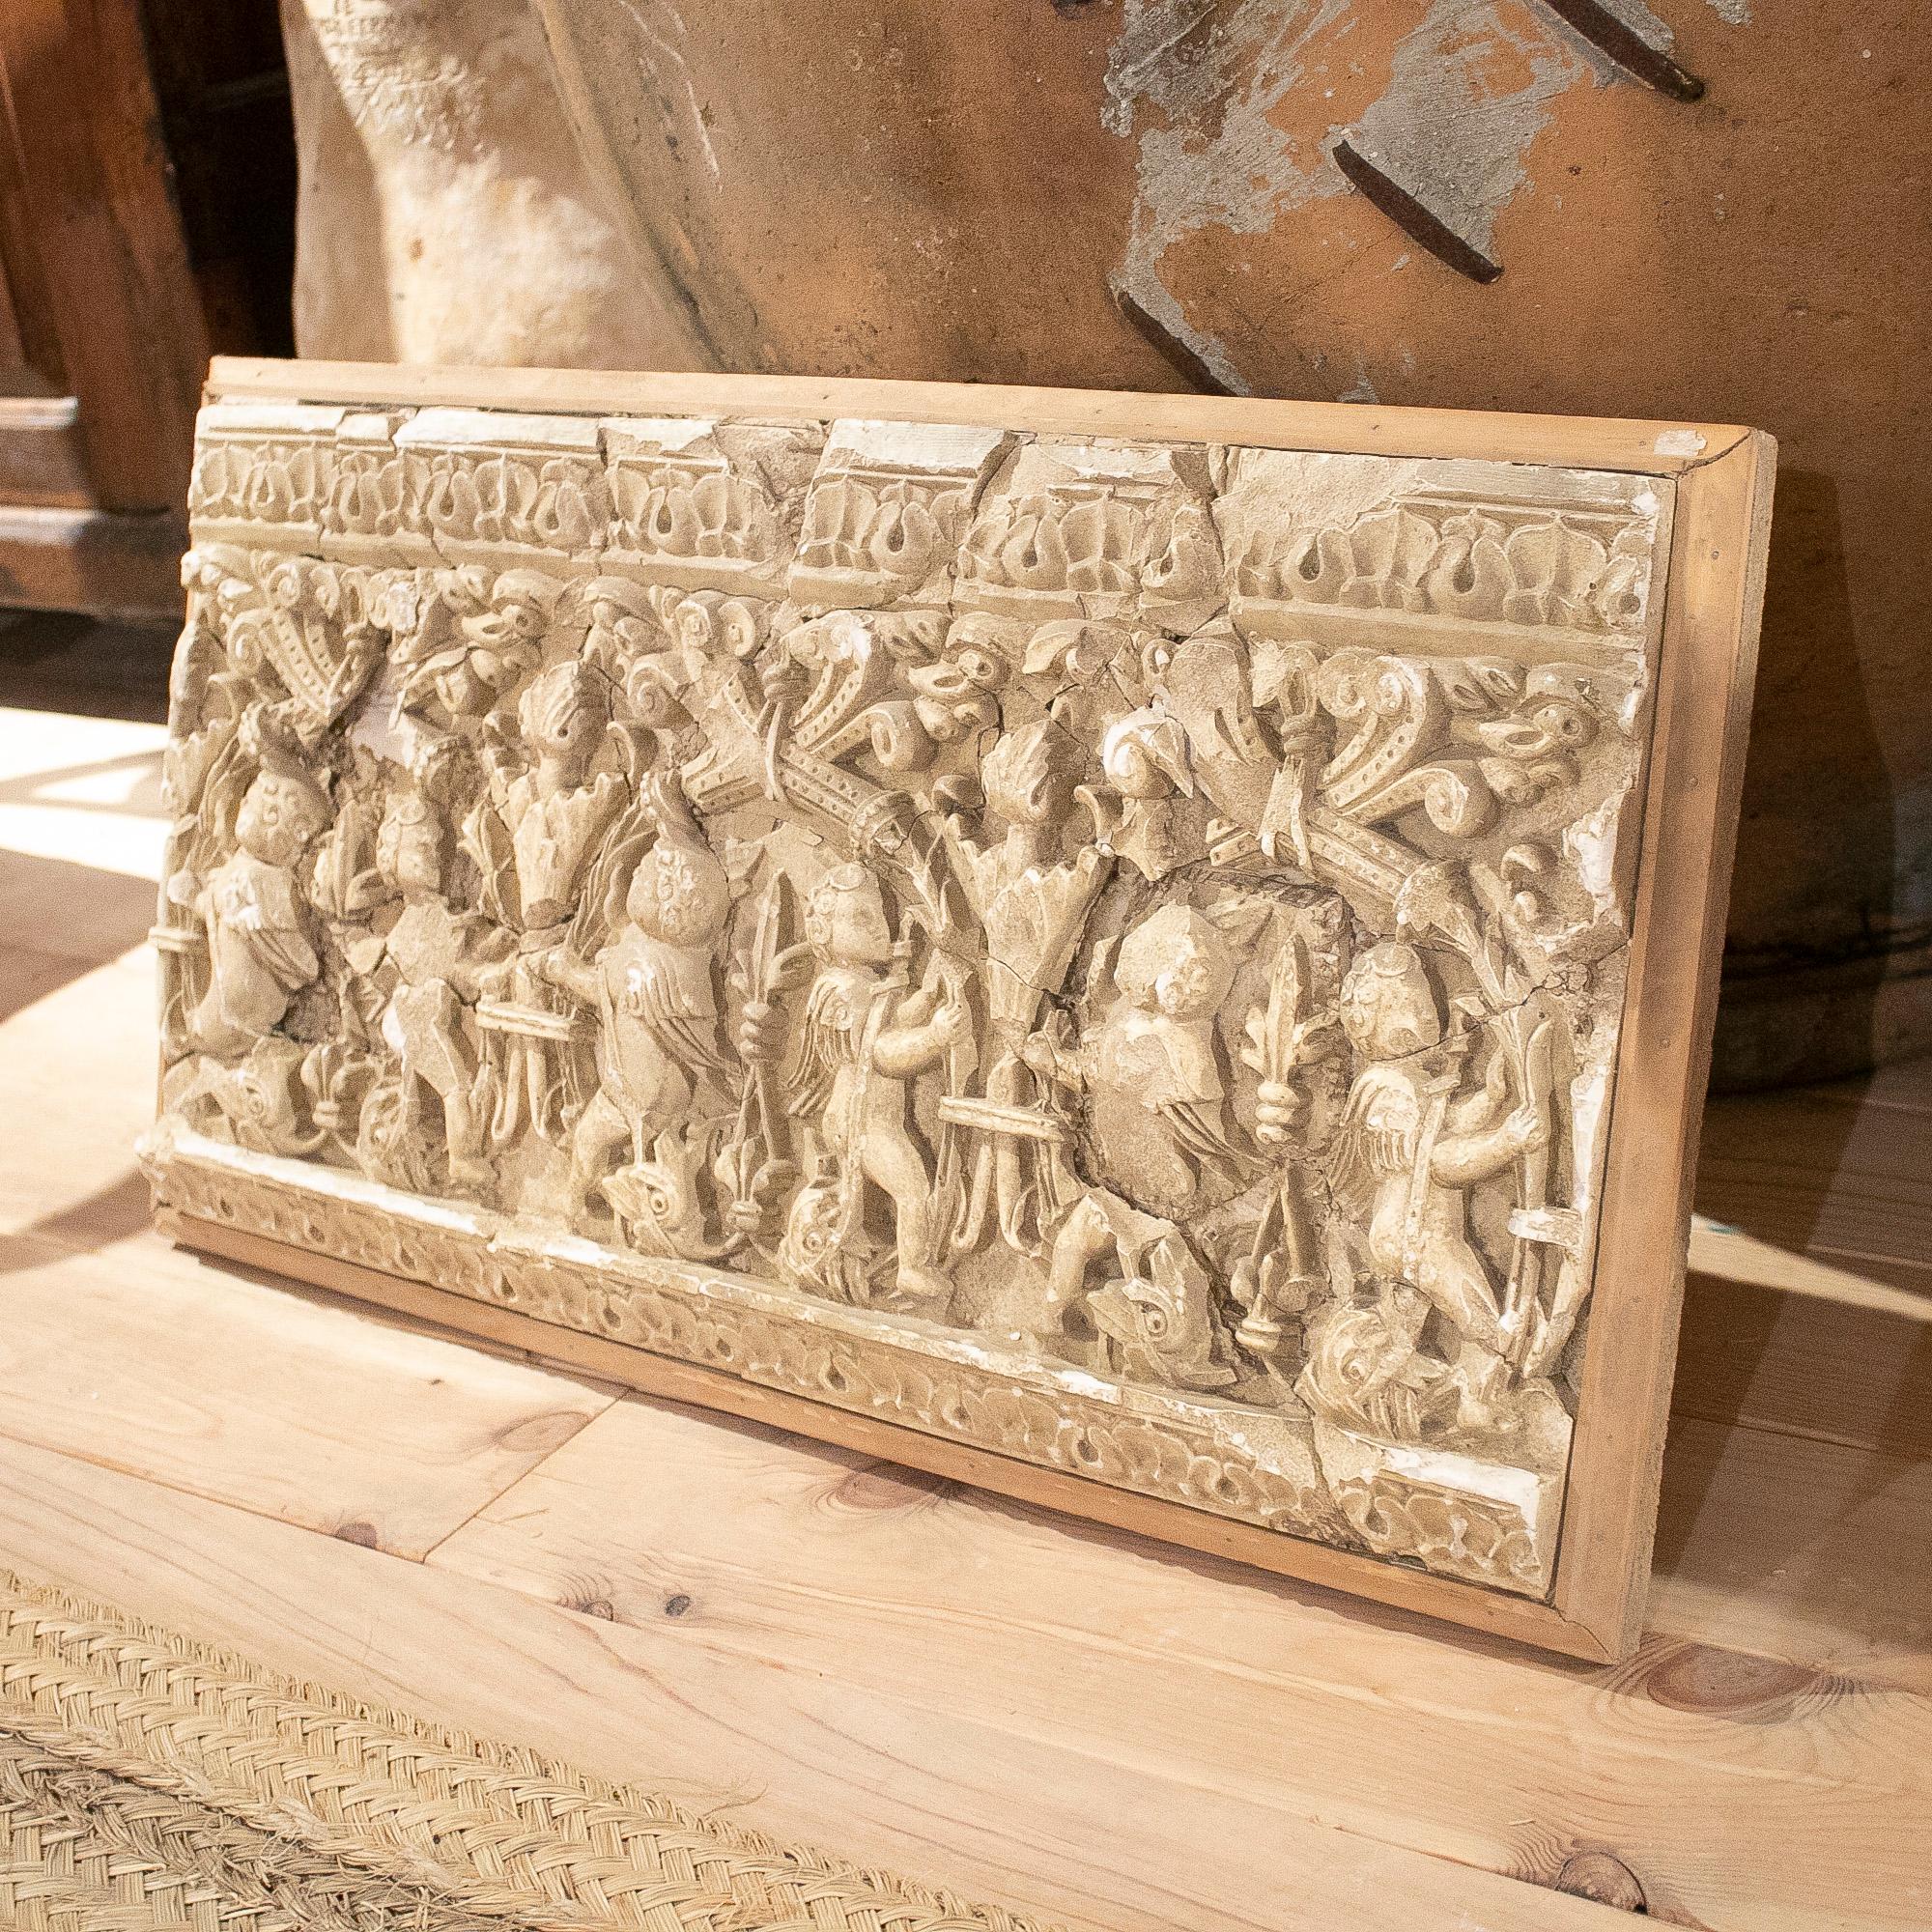 Antique 18th century Italian Stucco wall relief section in a wooden frame, decorated with cherubs and scrolls.